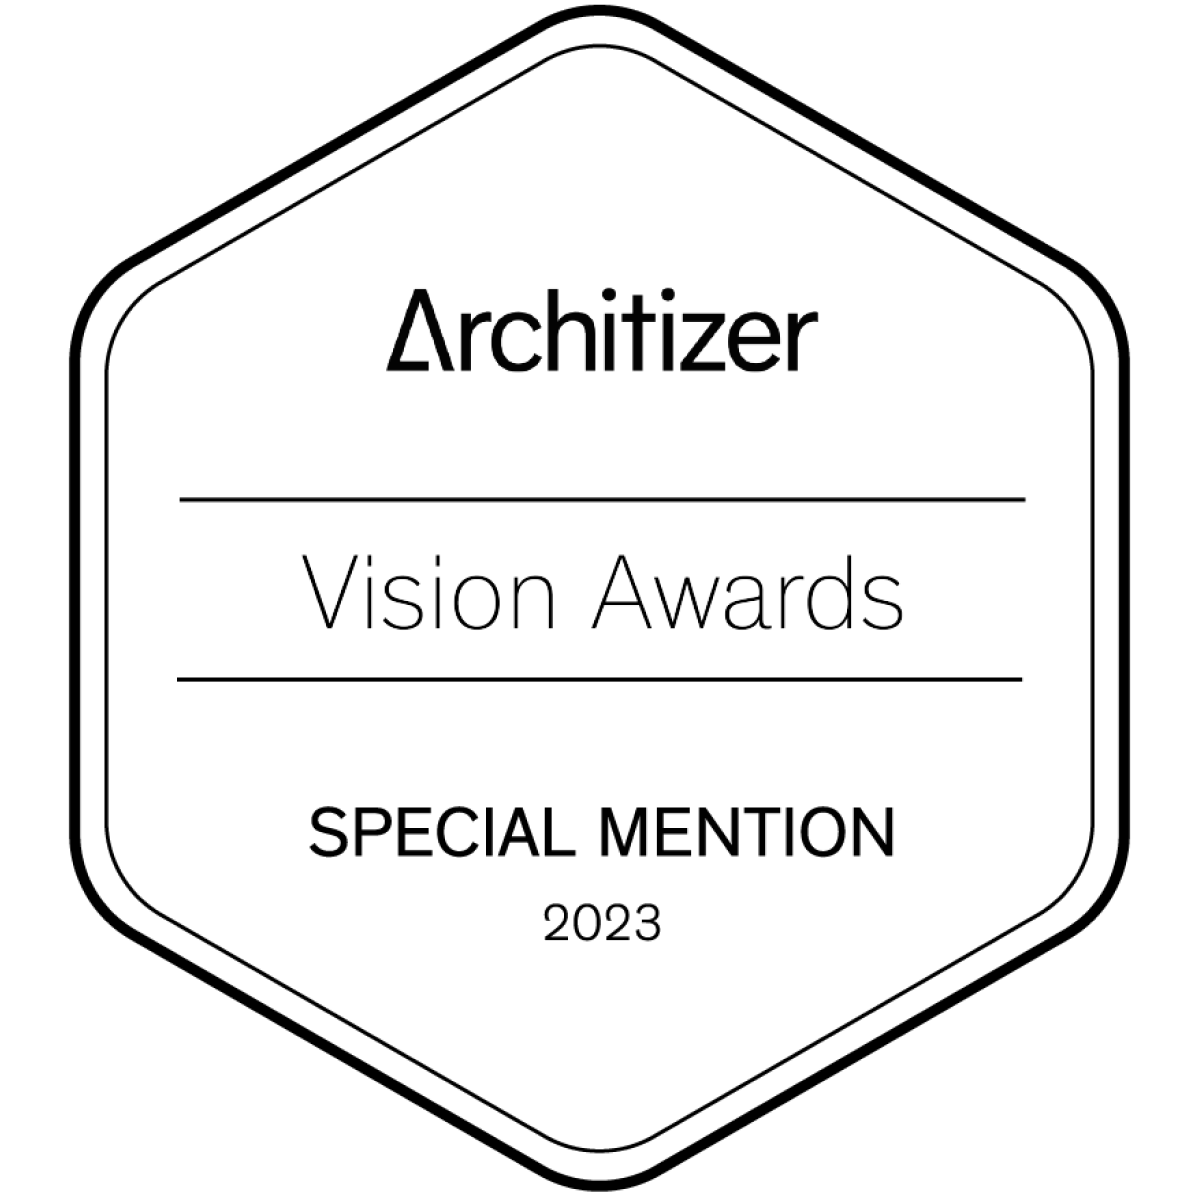 Vero Architizer Vision Awards - Special Mention 2023